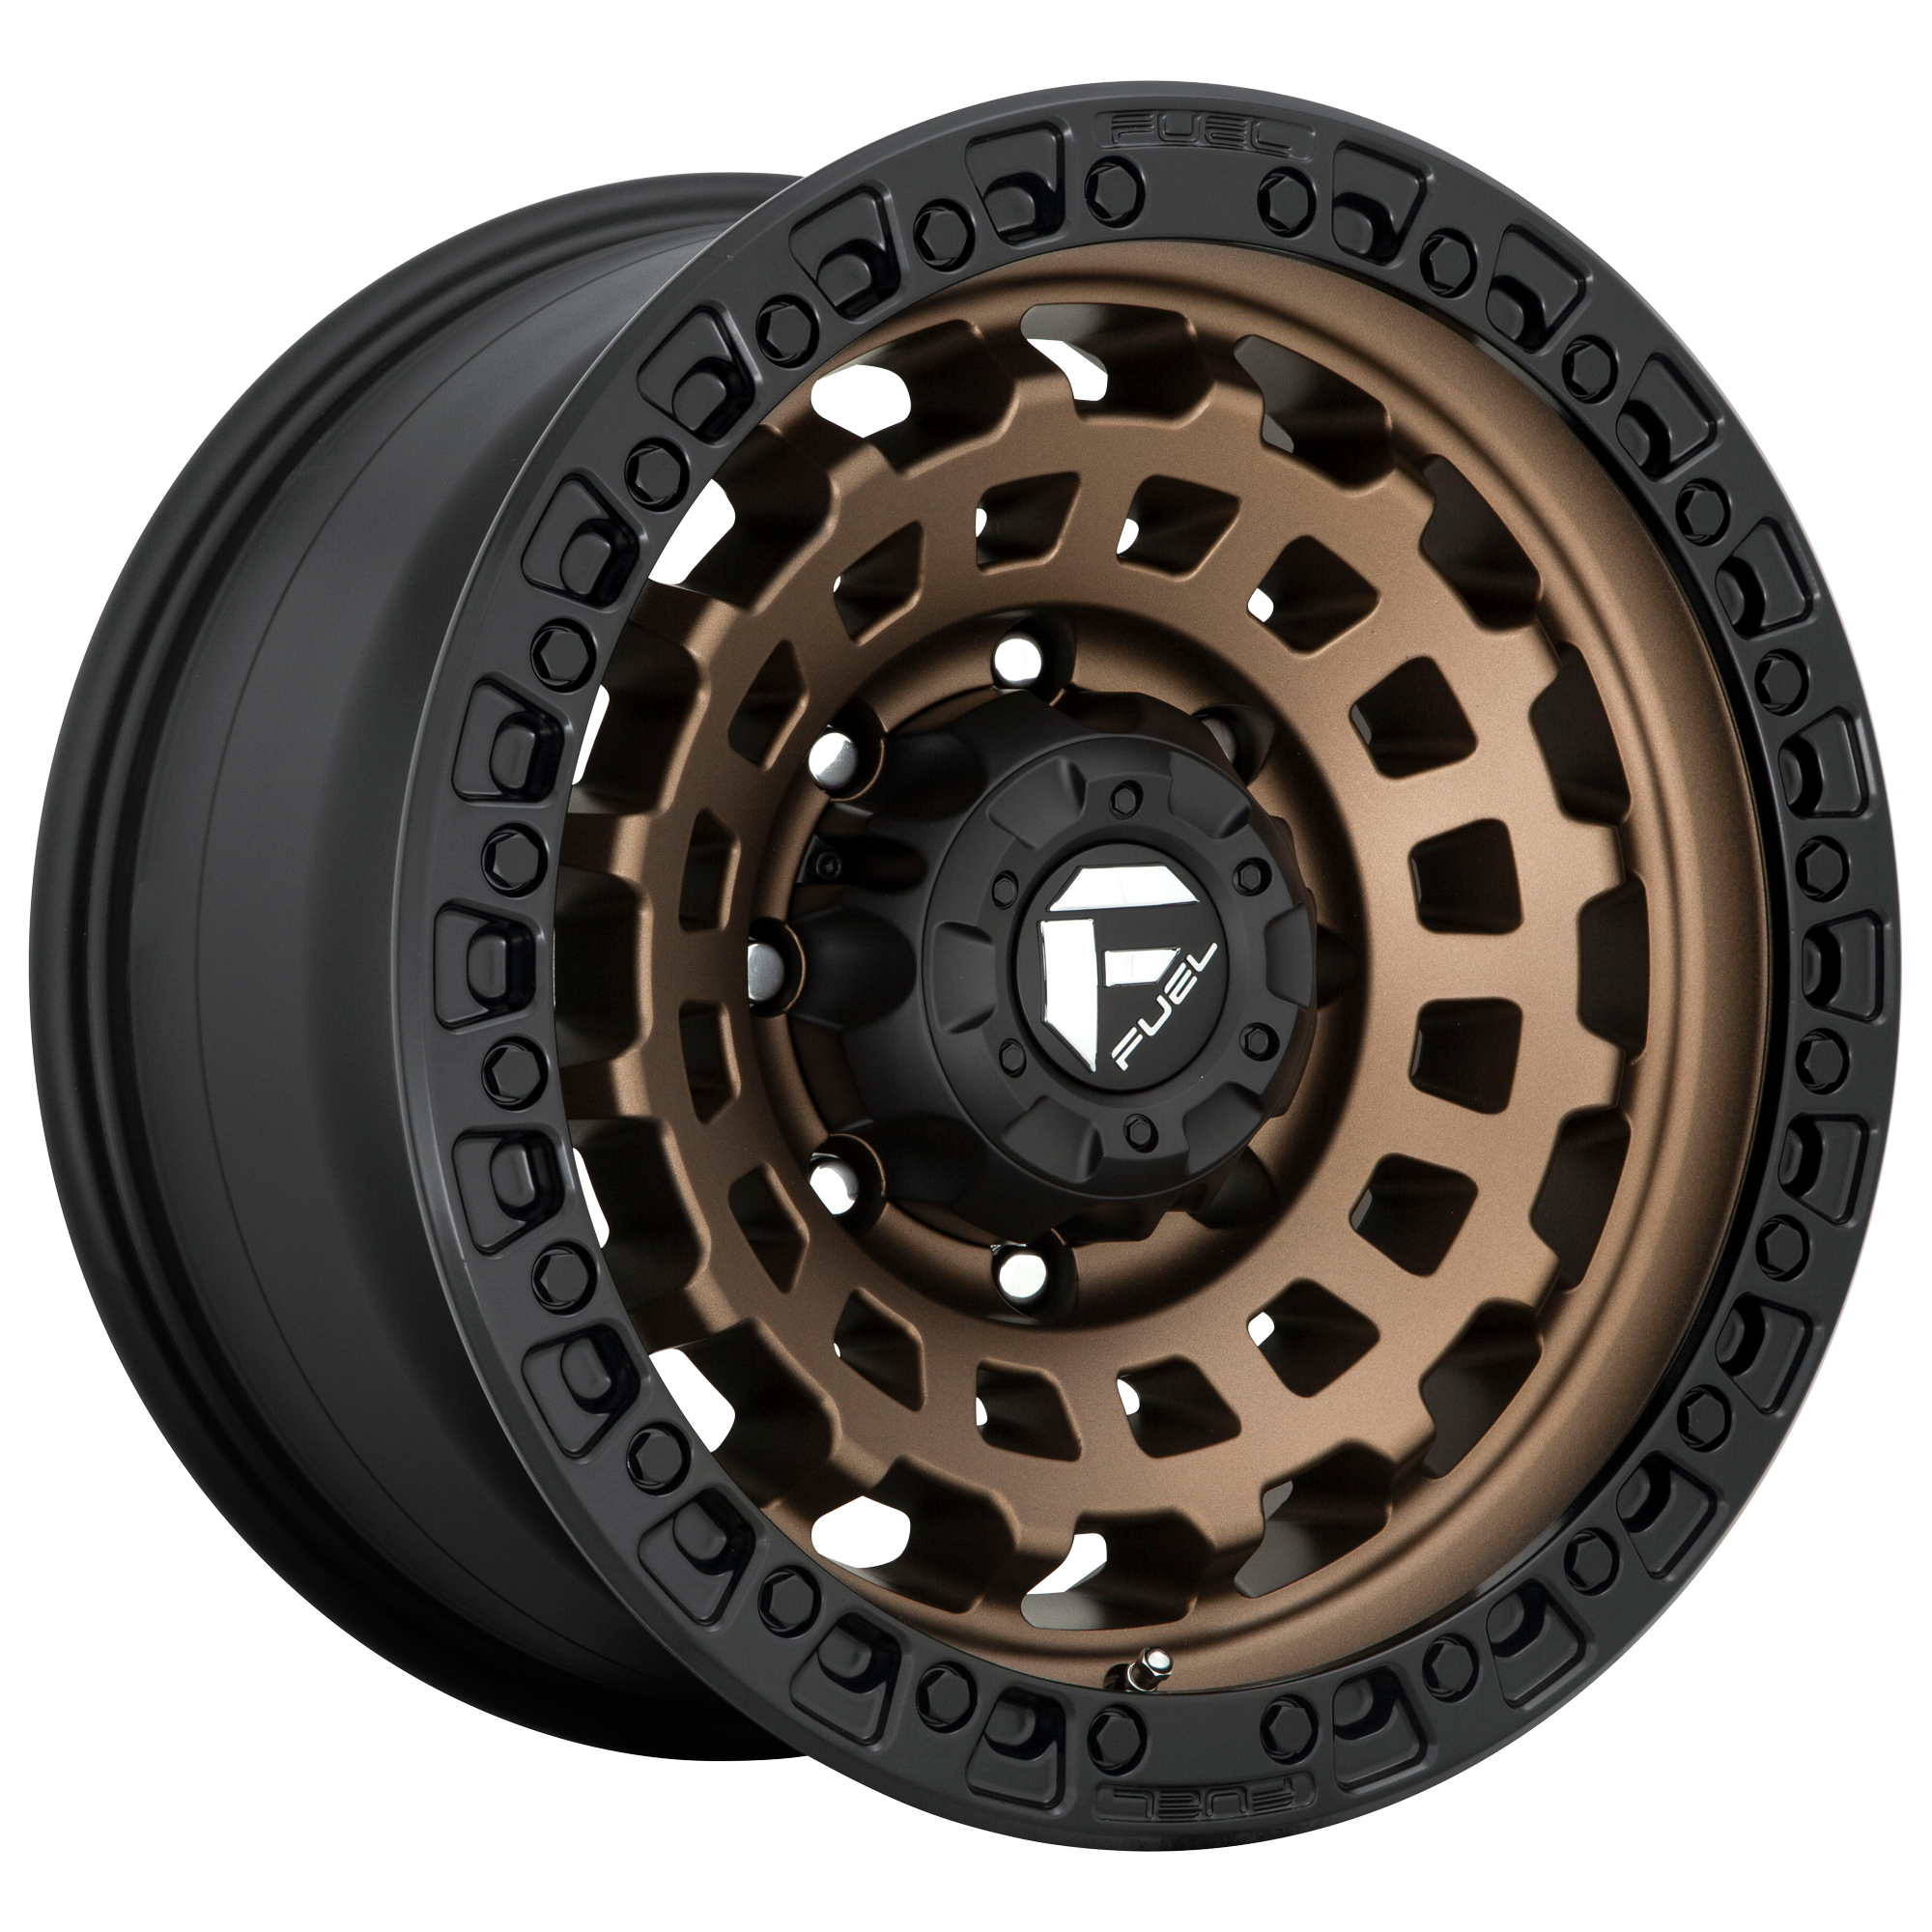 ZEPHYR 17x9 5x150.00 MATTE BRONZE BLACK BEAD RING (-12 mm) - Tires and Engine Performance